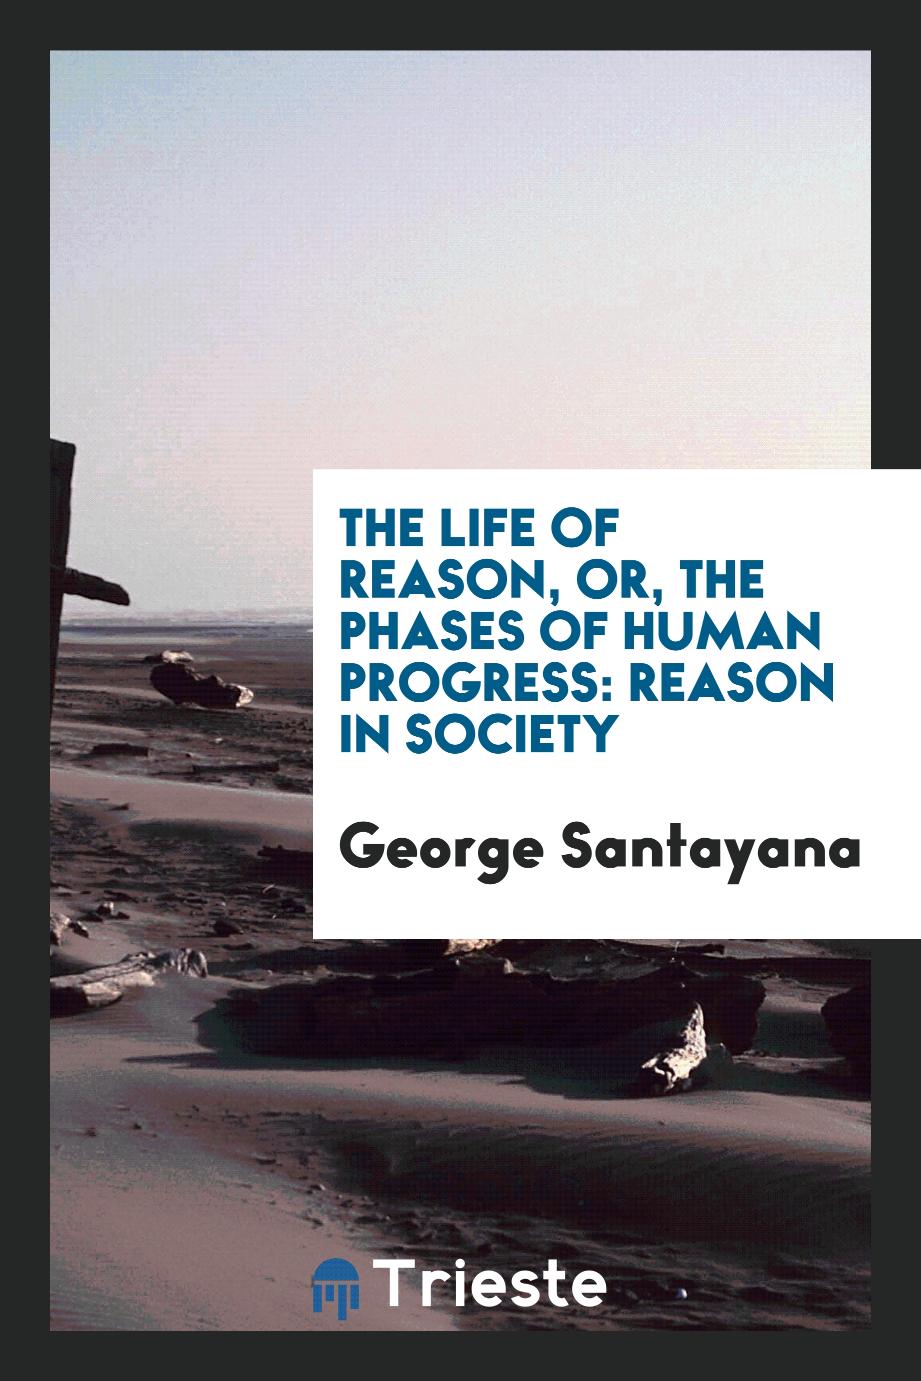 The life of reason, or, The phases of human progress: Reason in Society - George Santayana